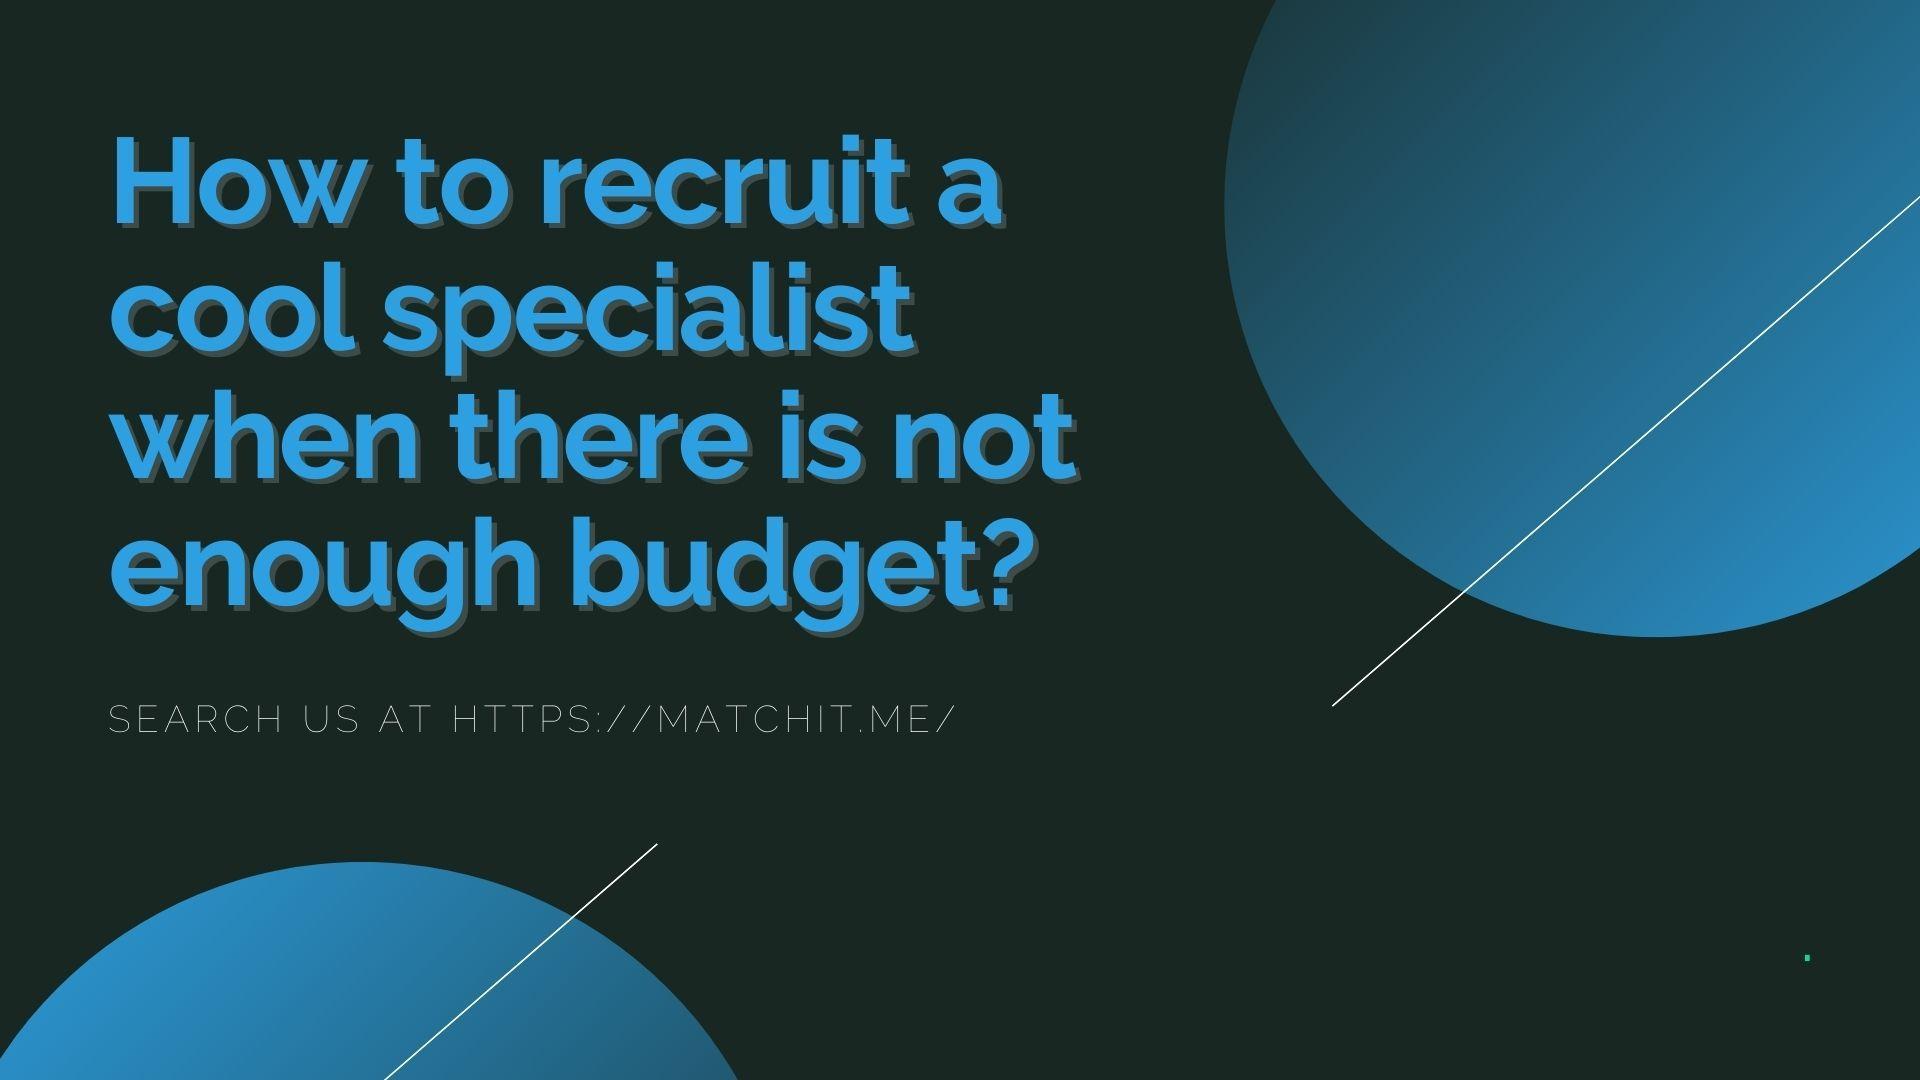 How-to-recruit-a-cool-specialist-when-there-is-not-enough-budget